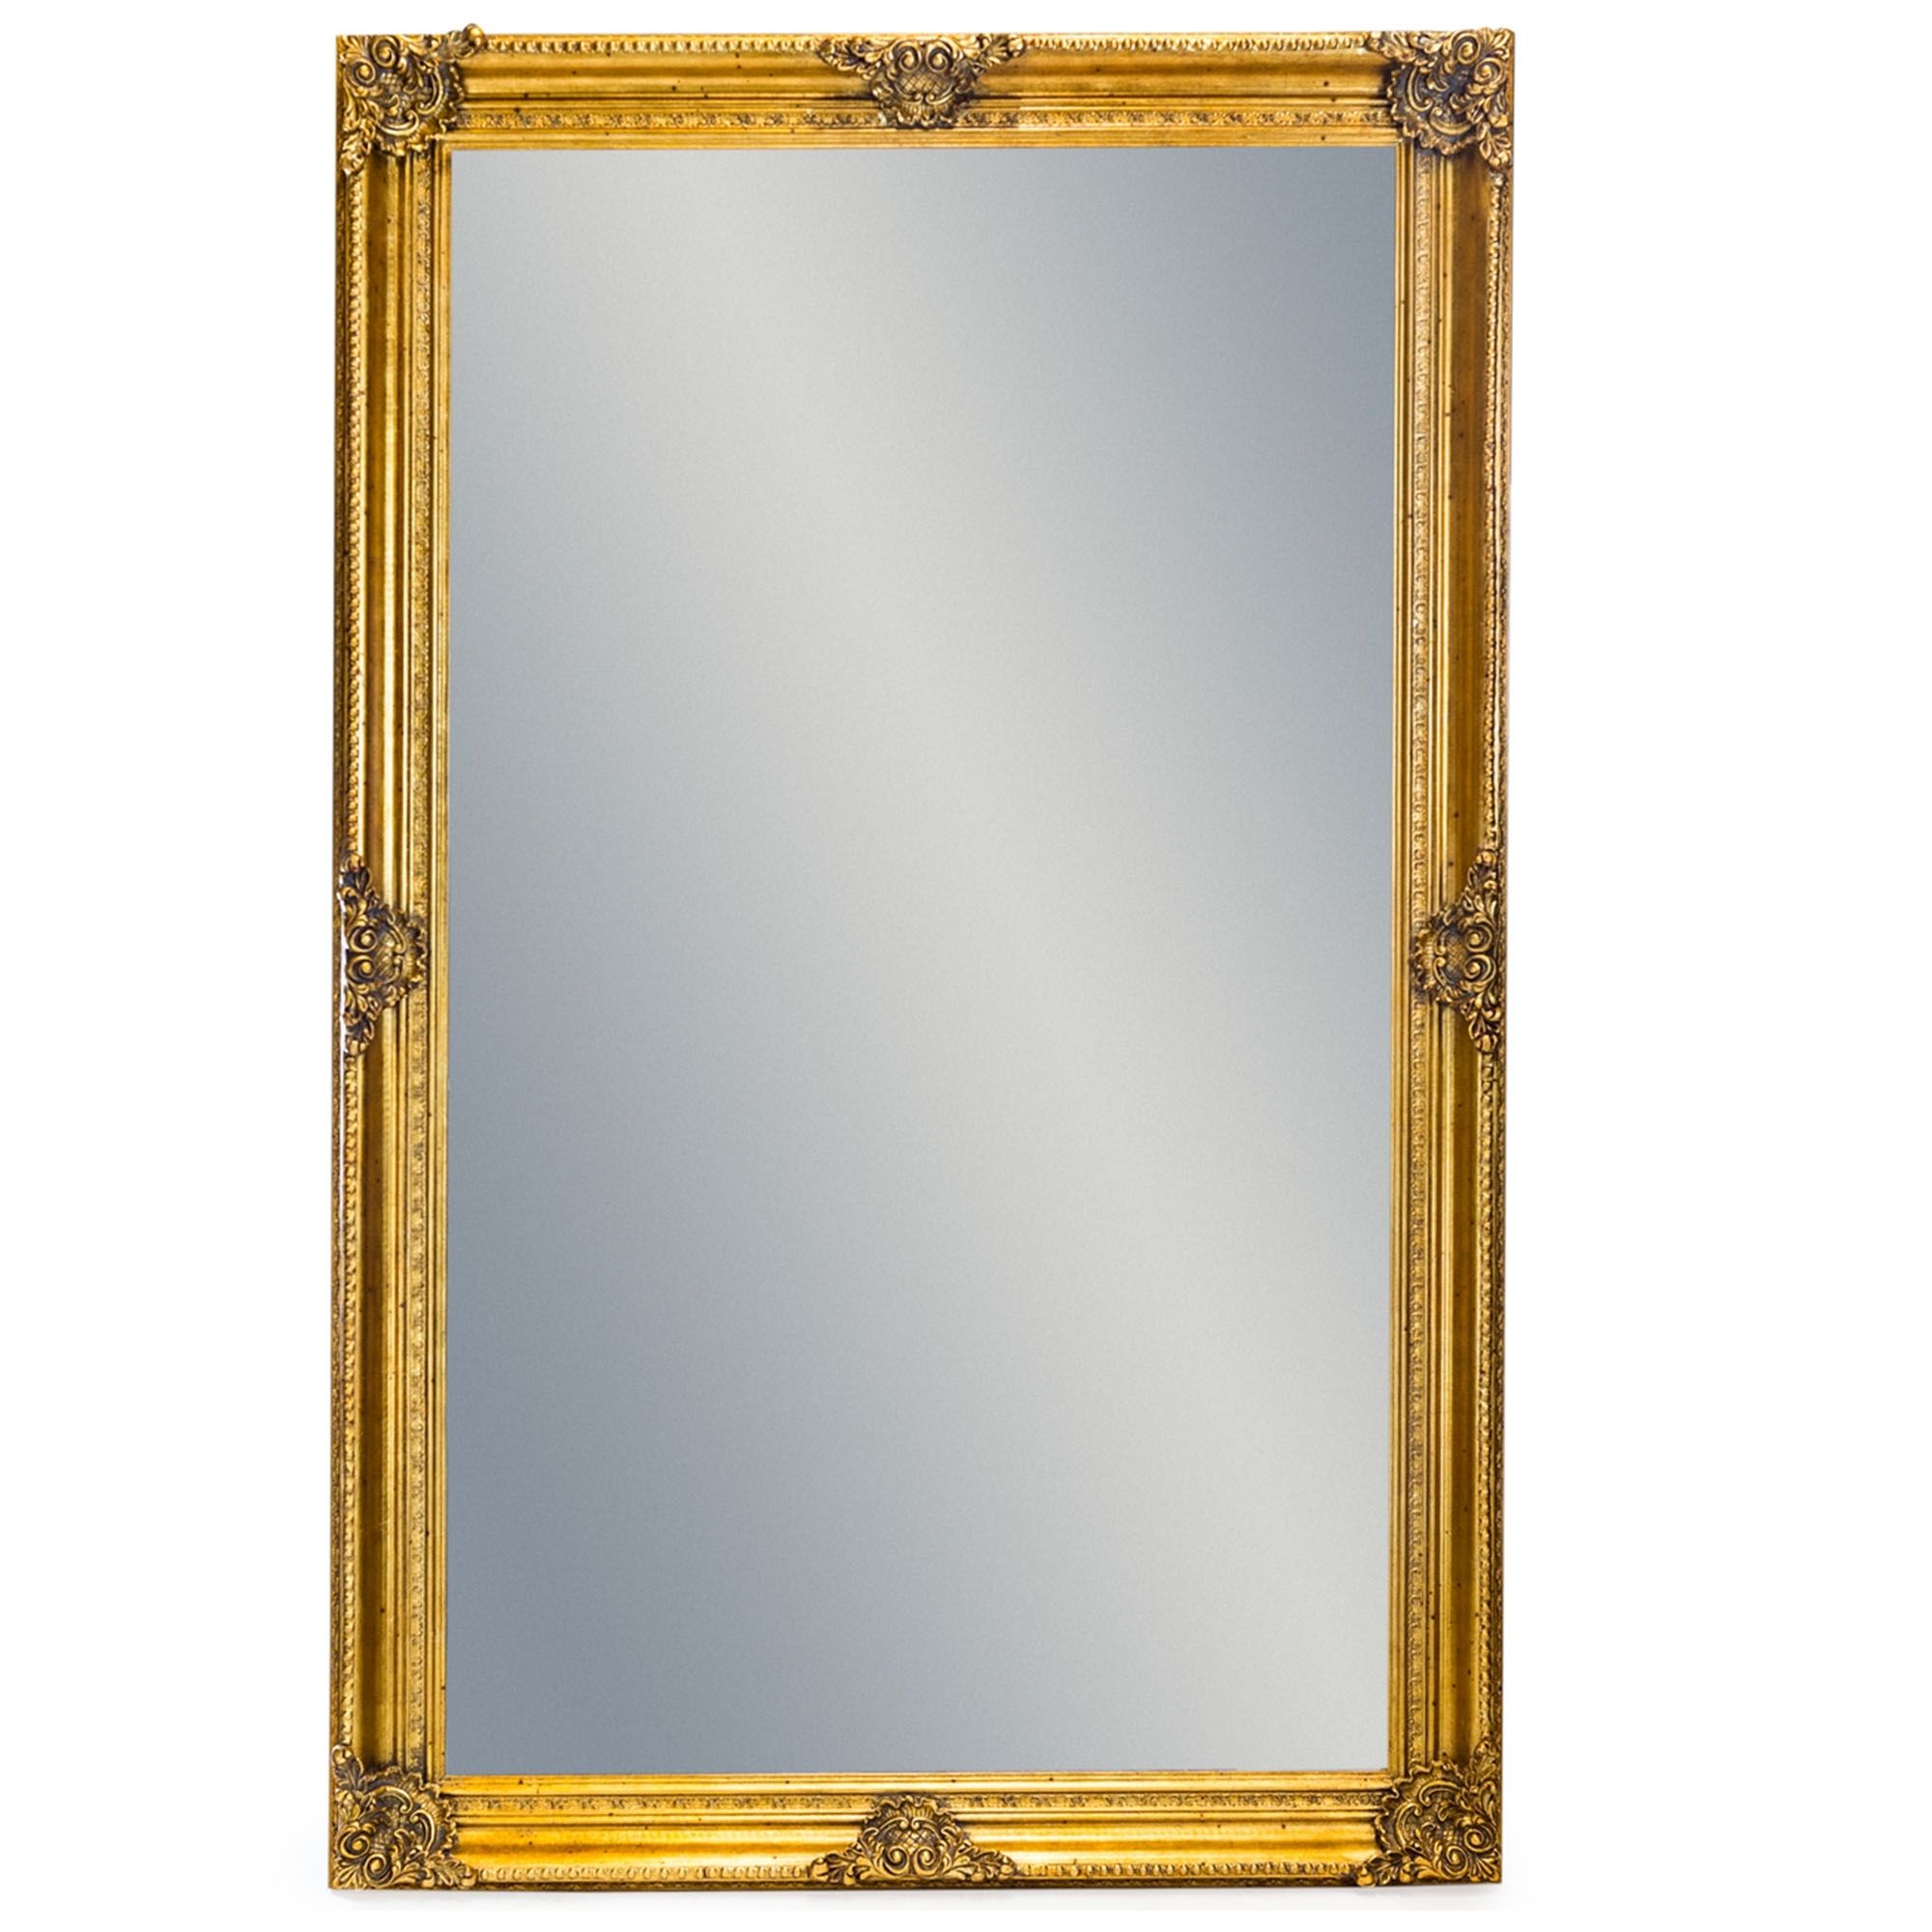 Extra Large Gold Rectangular Antique French Style Mirror Throughout Most Current Large Rectangular Wall Mirrors (View 17 of 20)